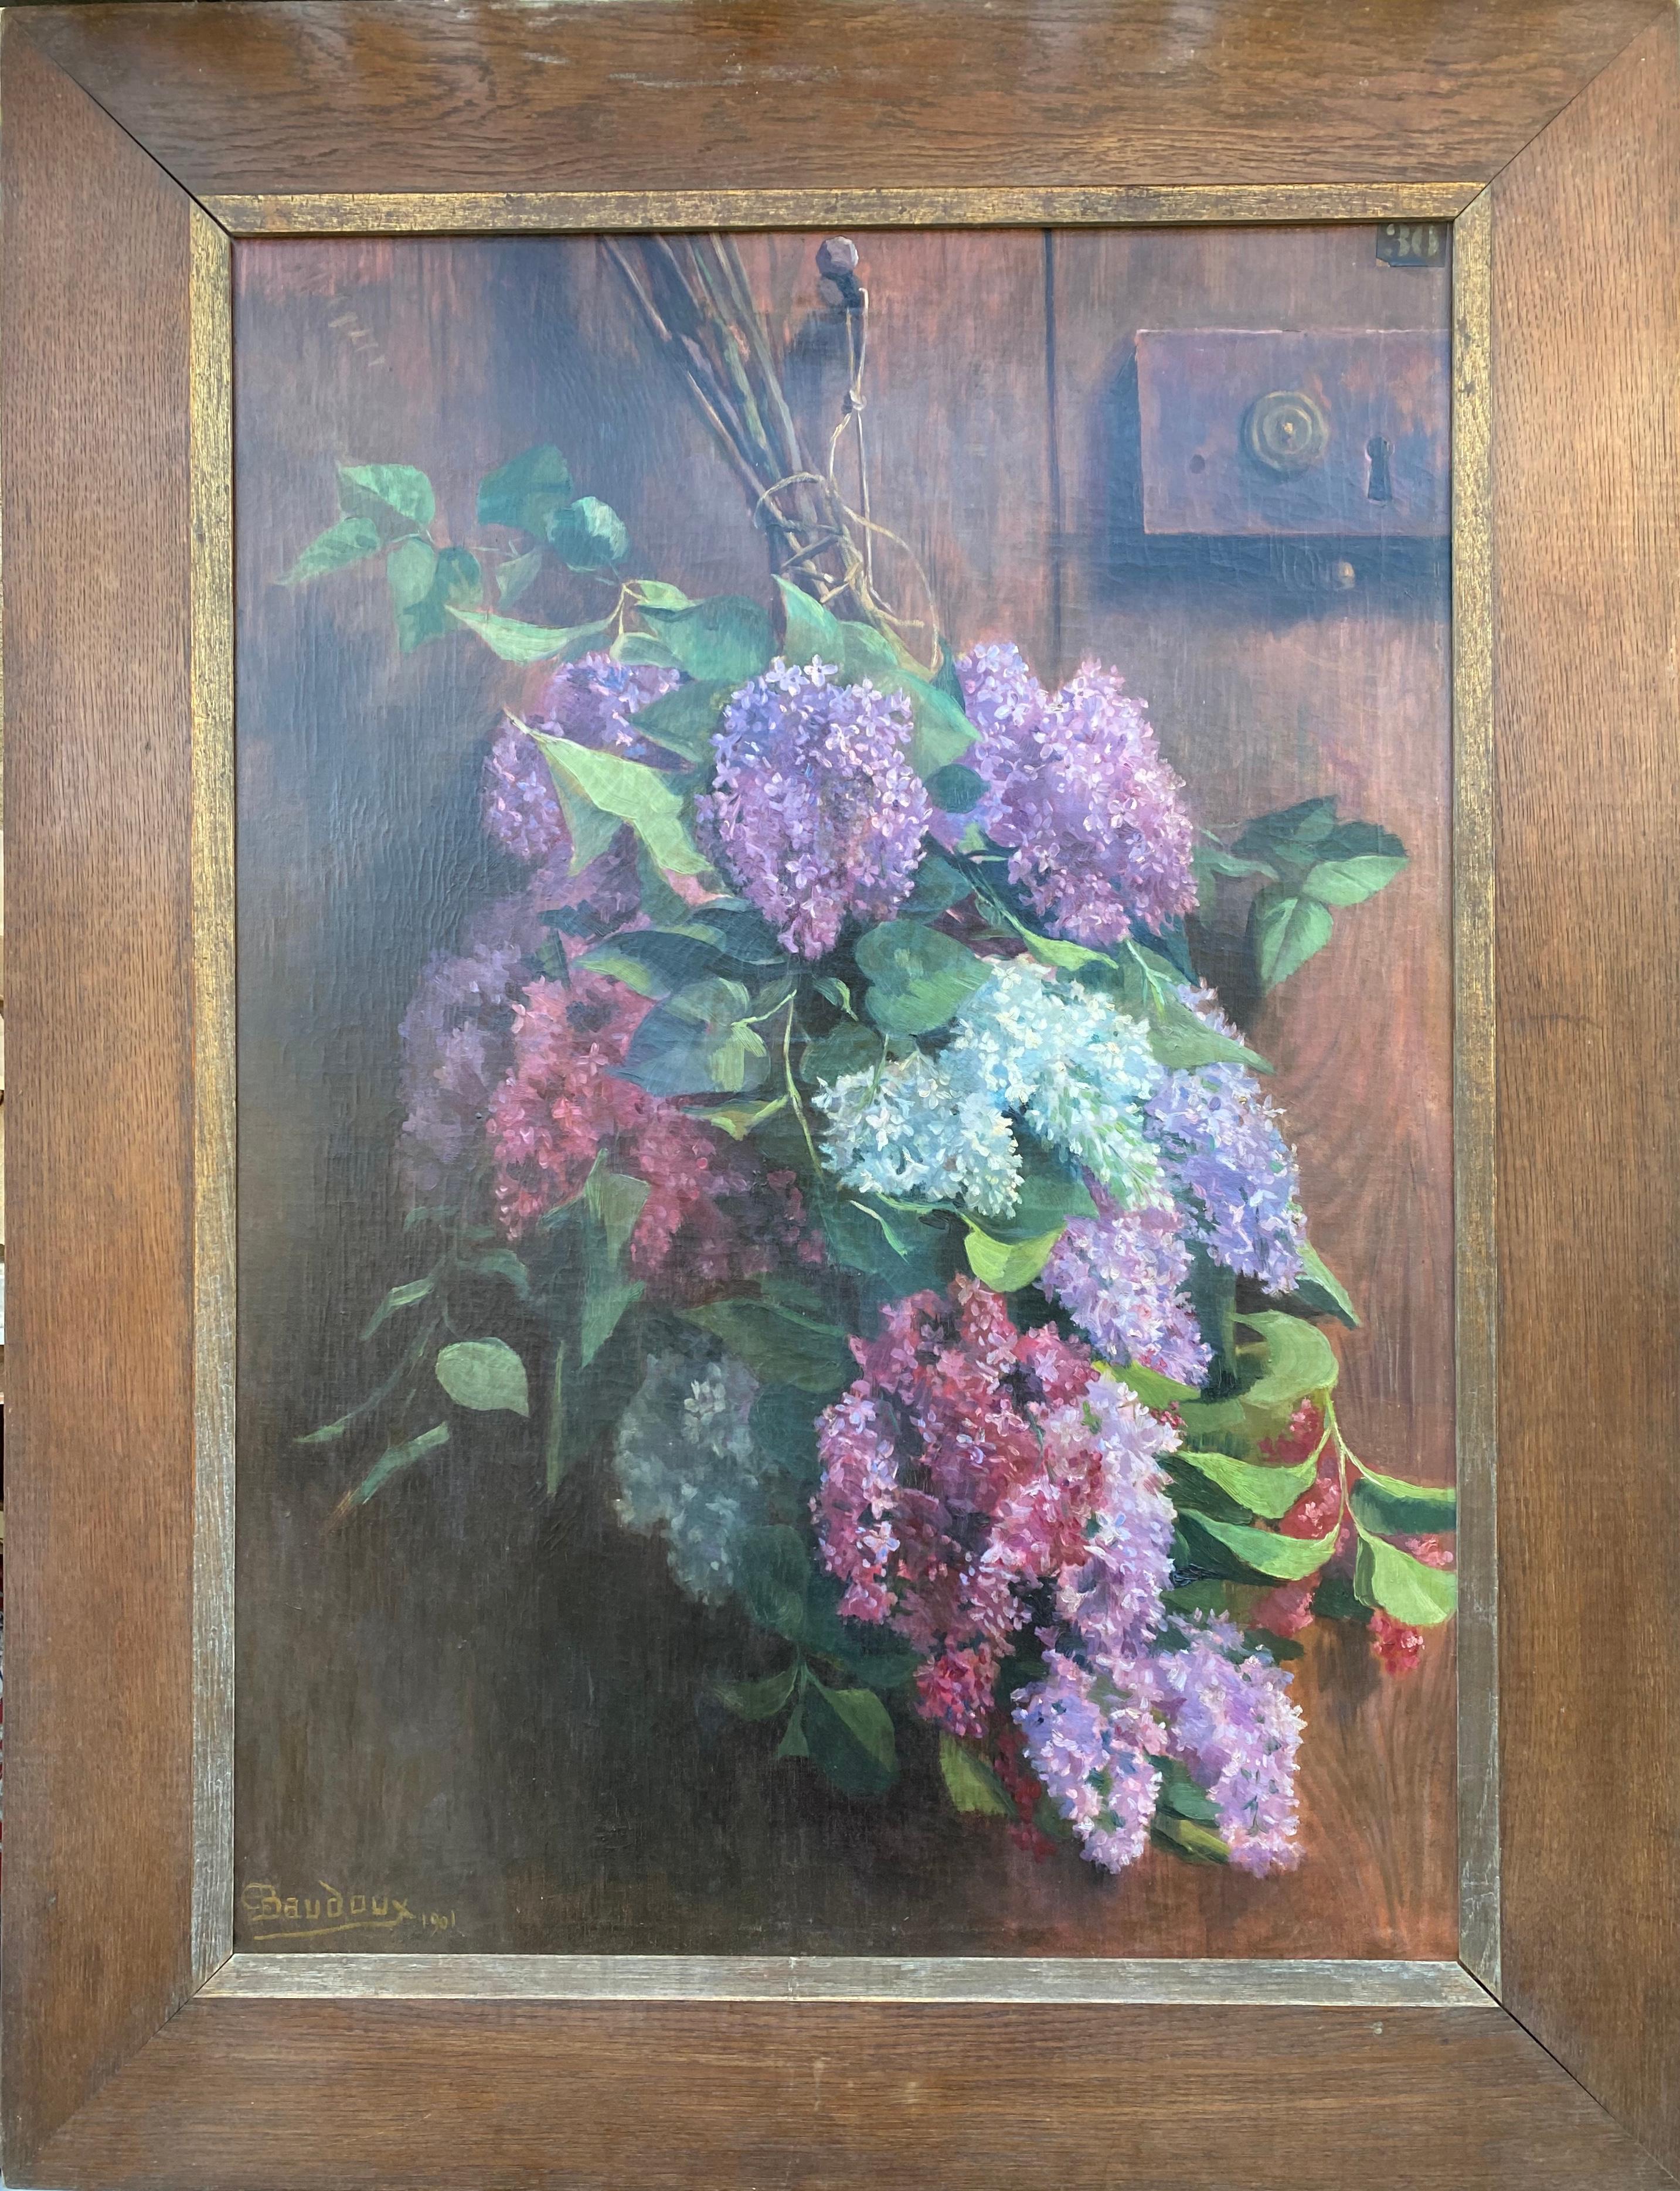 Henri Baudoux Figurative Painting - Lilac flowers at the door, 1901 uplifting floral still life large oil on canvas